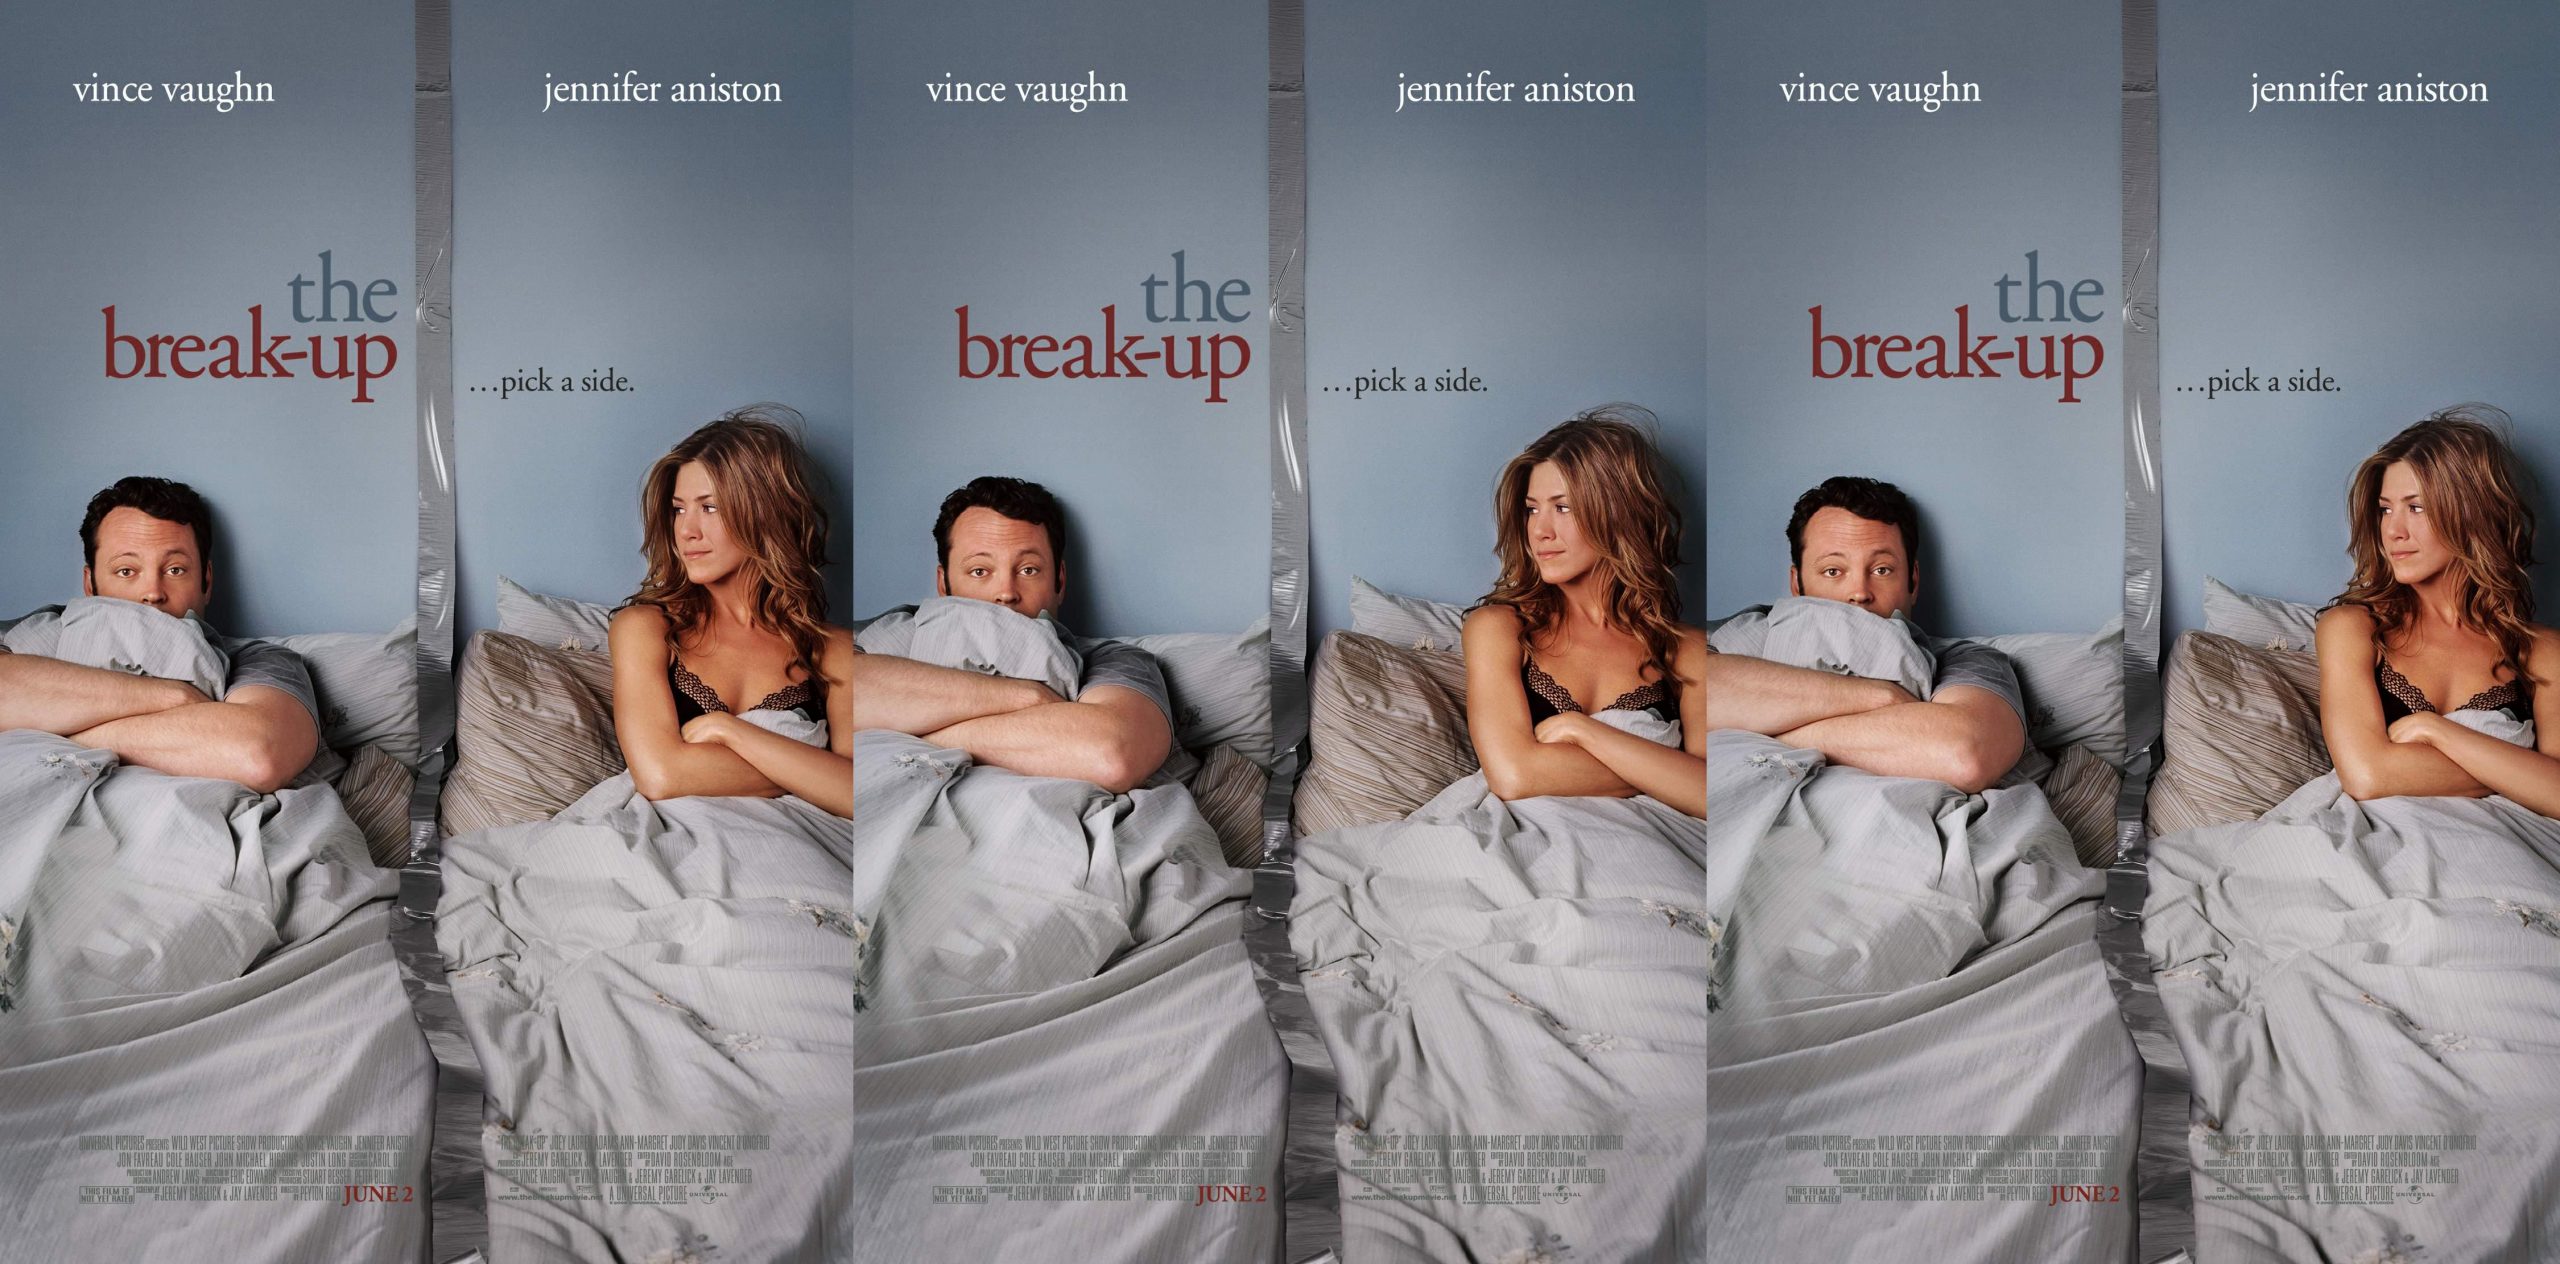 The Break-Up, Amazon Prime Video, Universal Pictures, Mosaic, Wild West Picture Show Productions